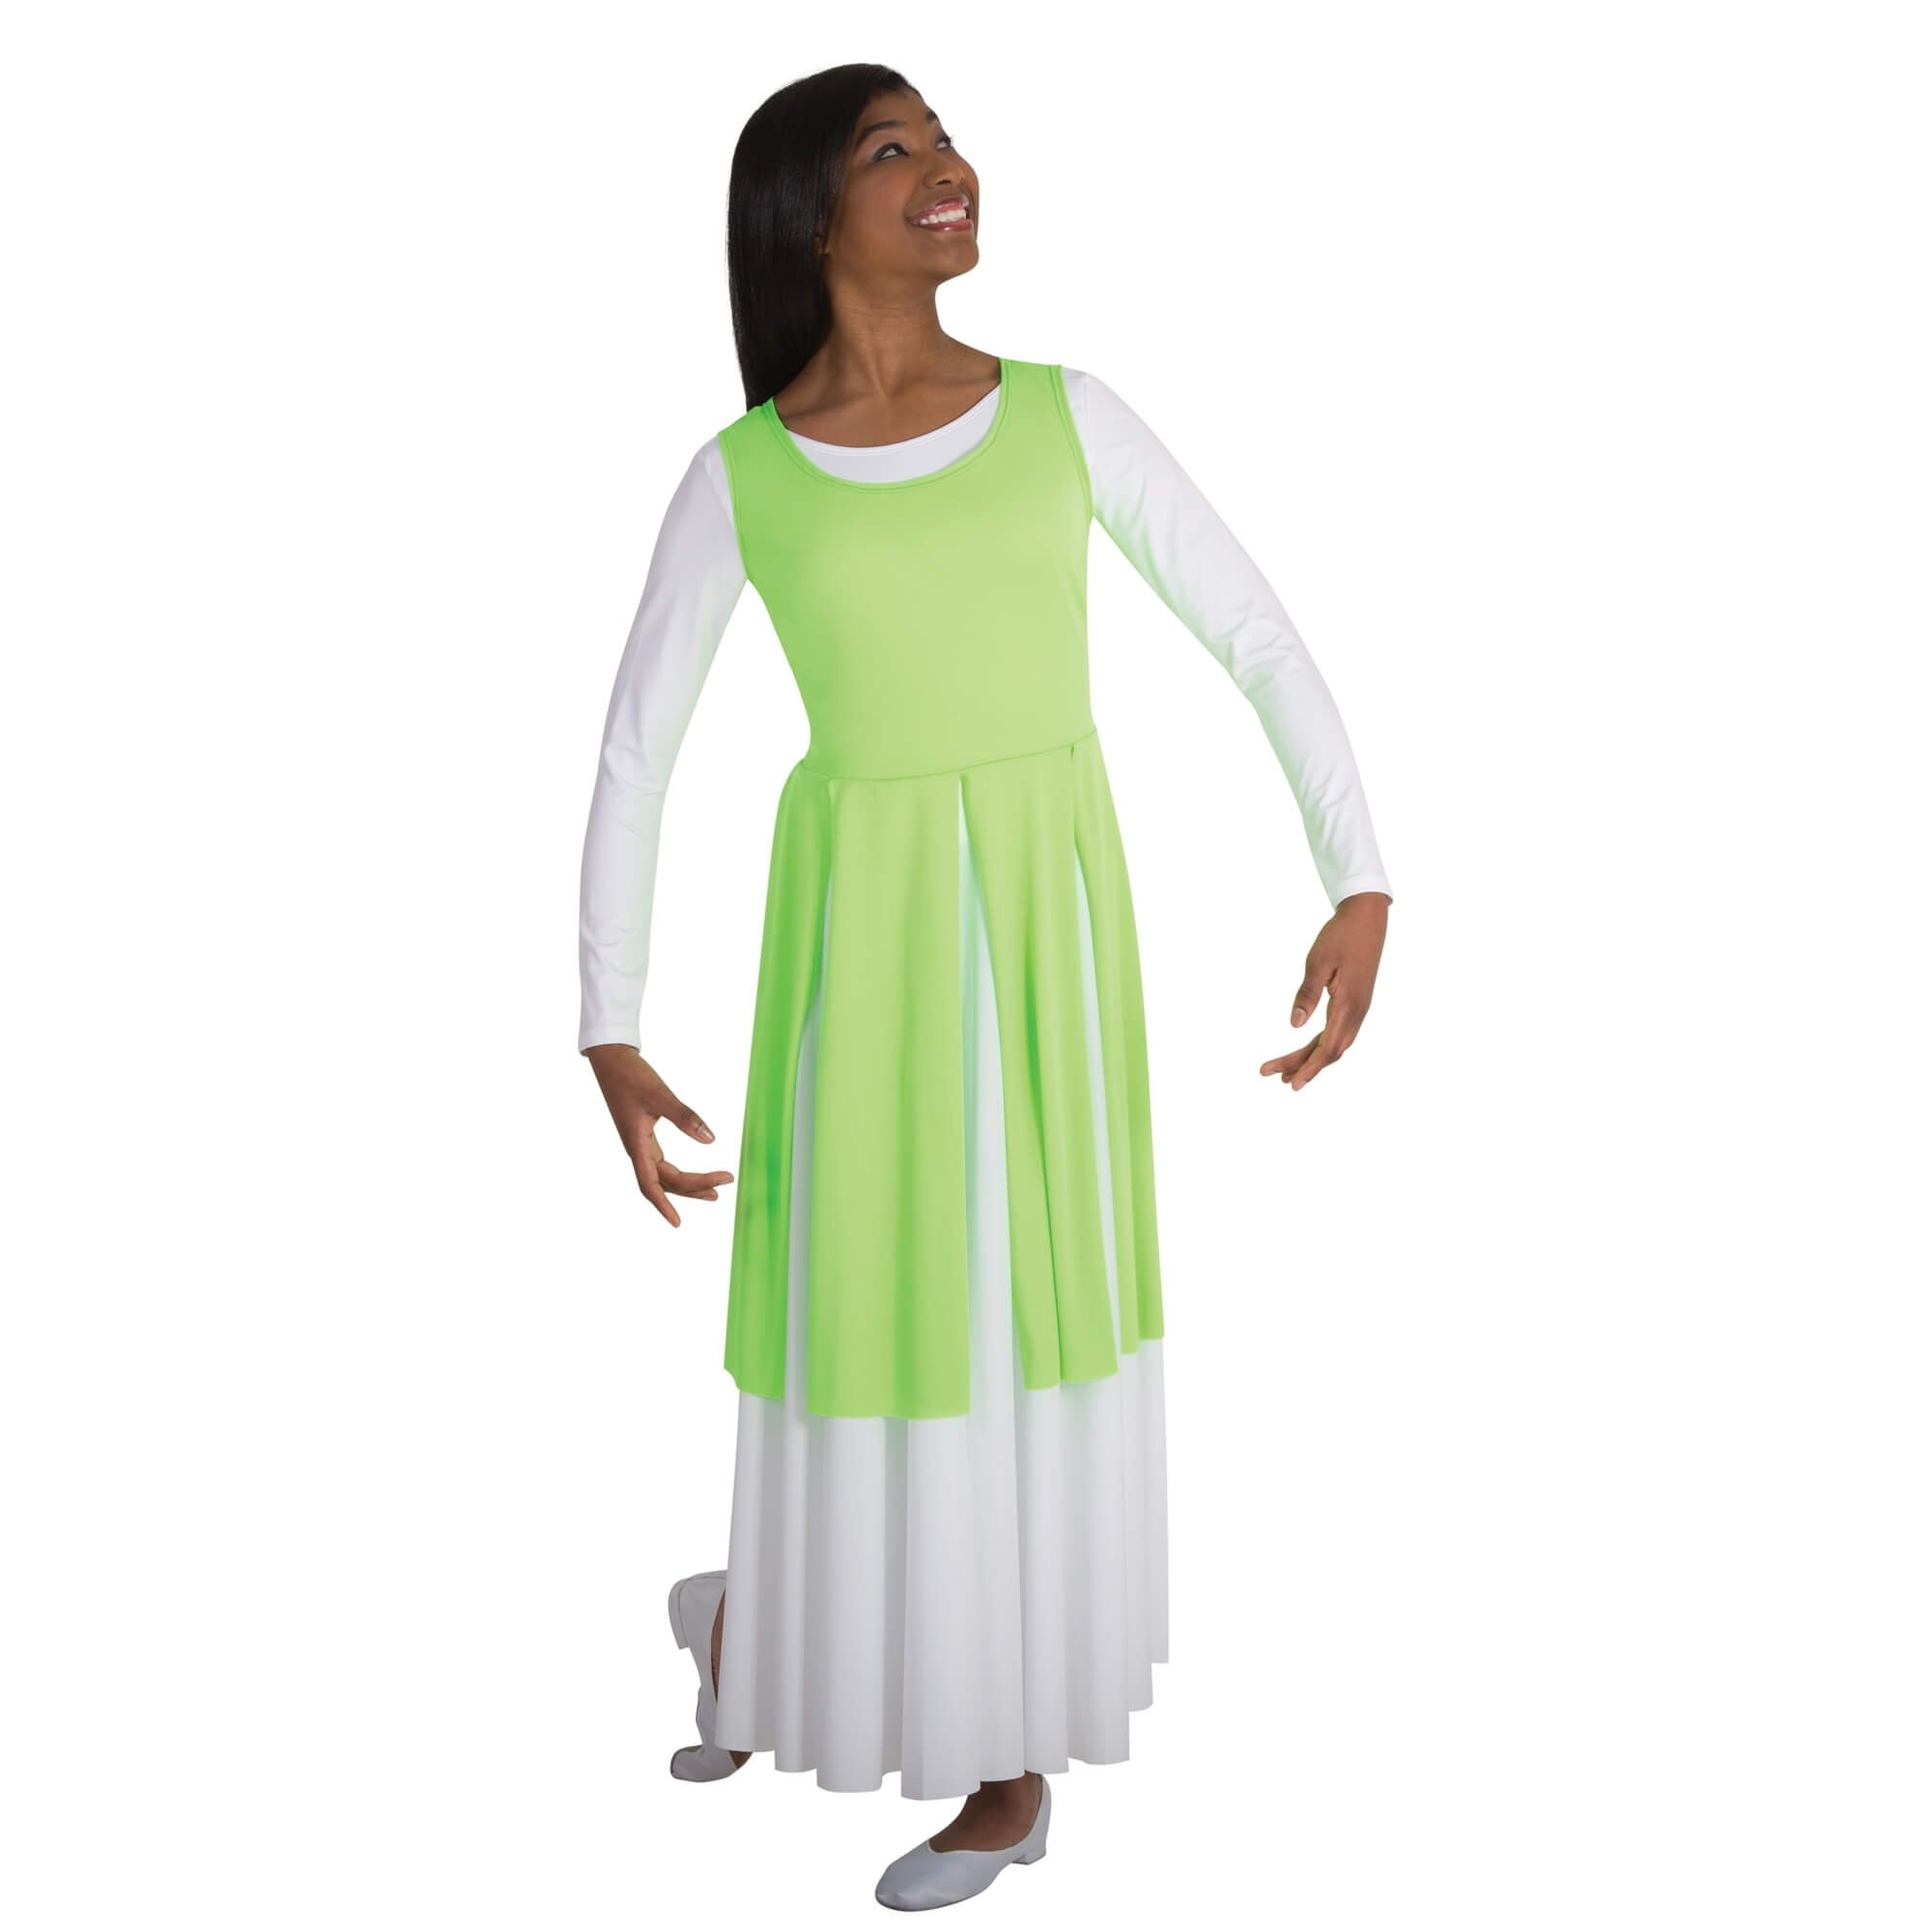 Body Wrappers Liturgical Dance Fly-Away Panel Tunic